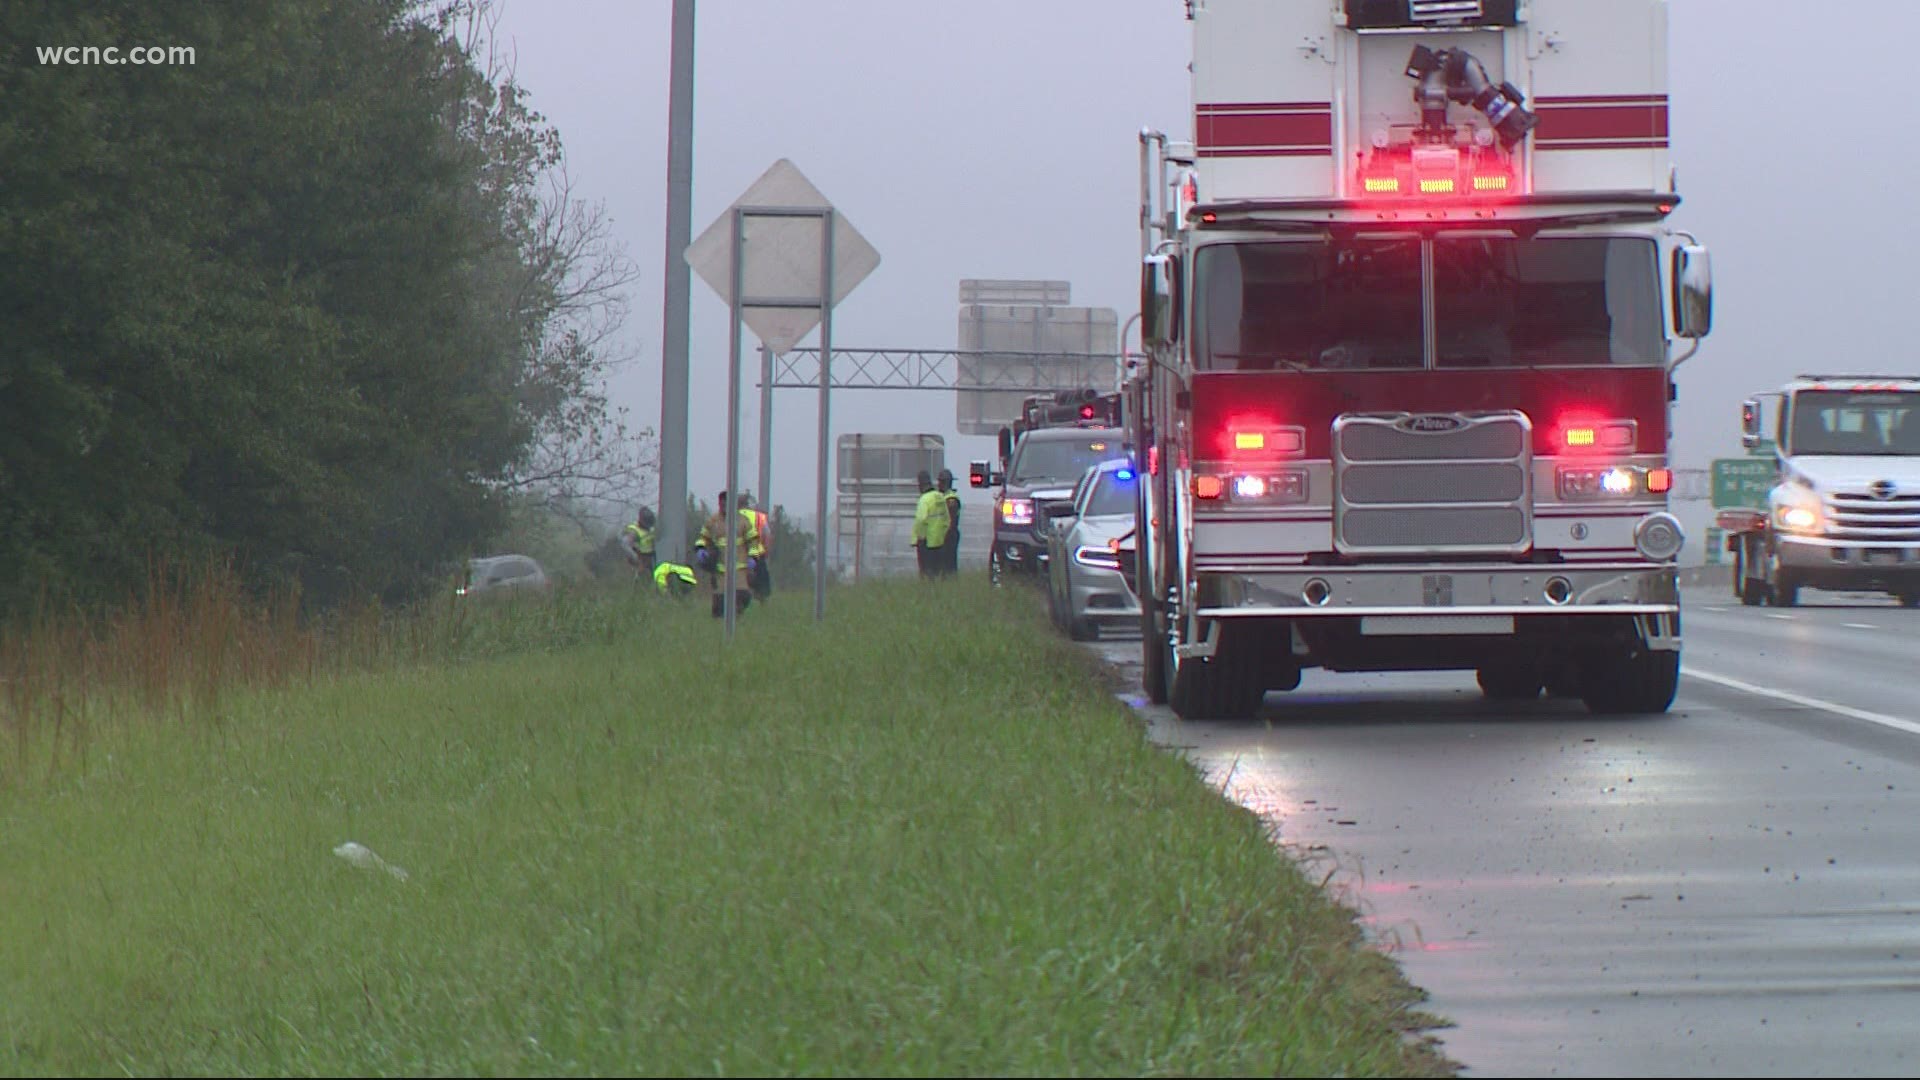 Officials said the car overturned down an embankment. No word yet on if the weather played a role in the crash.